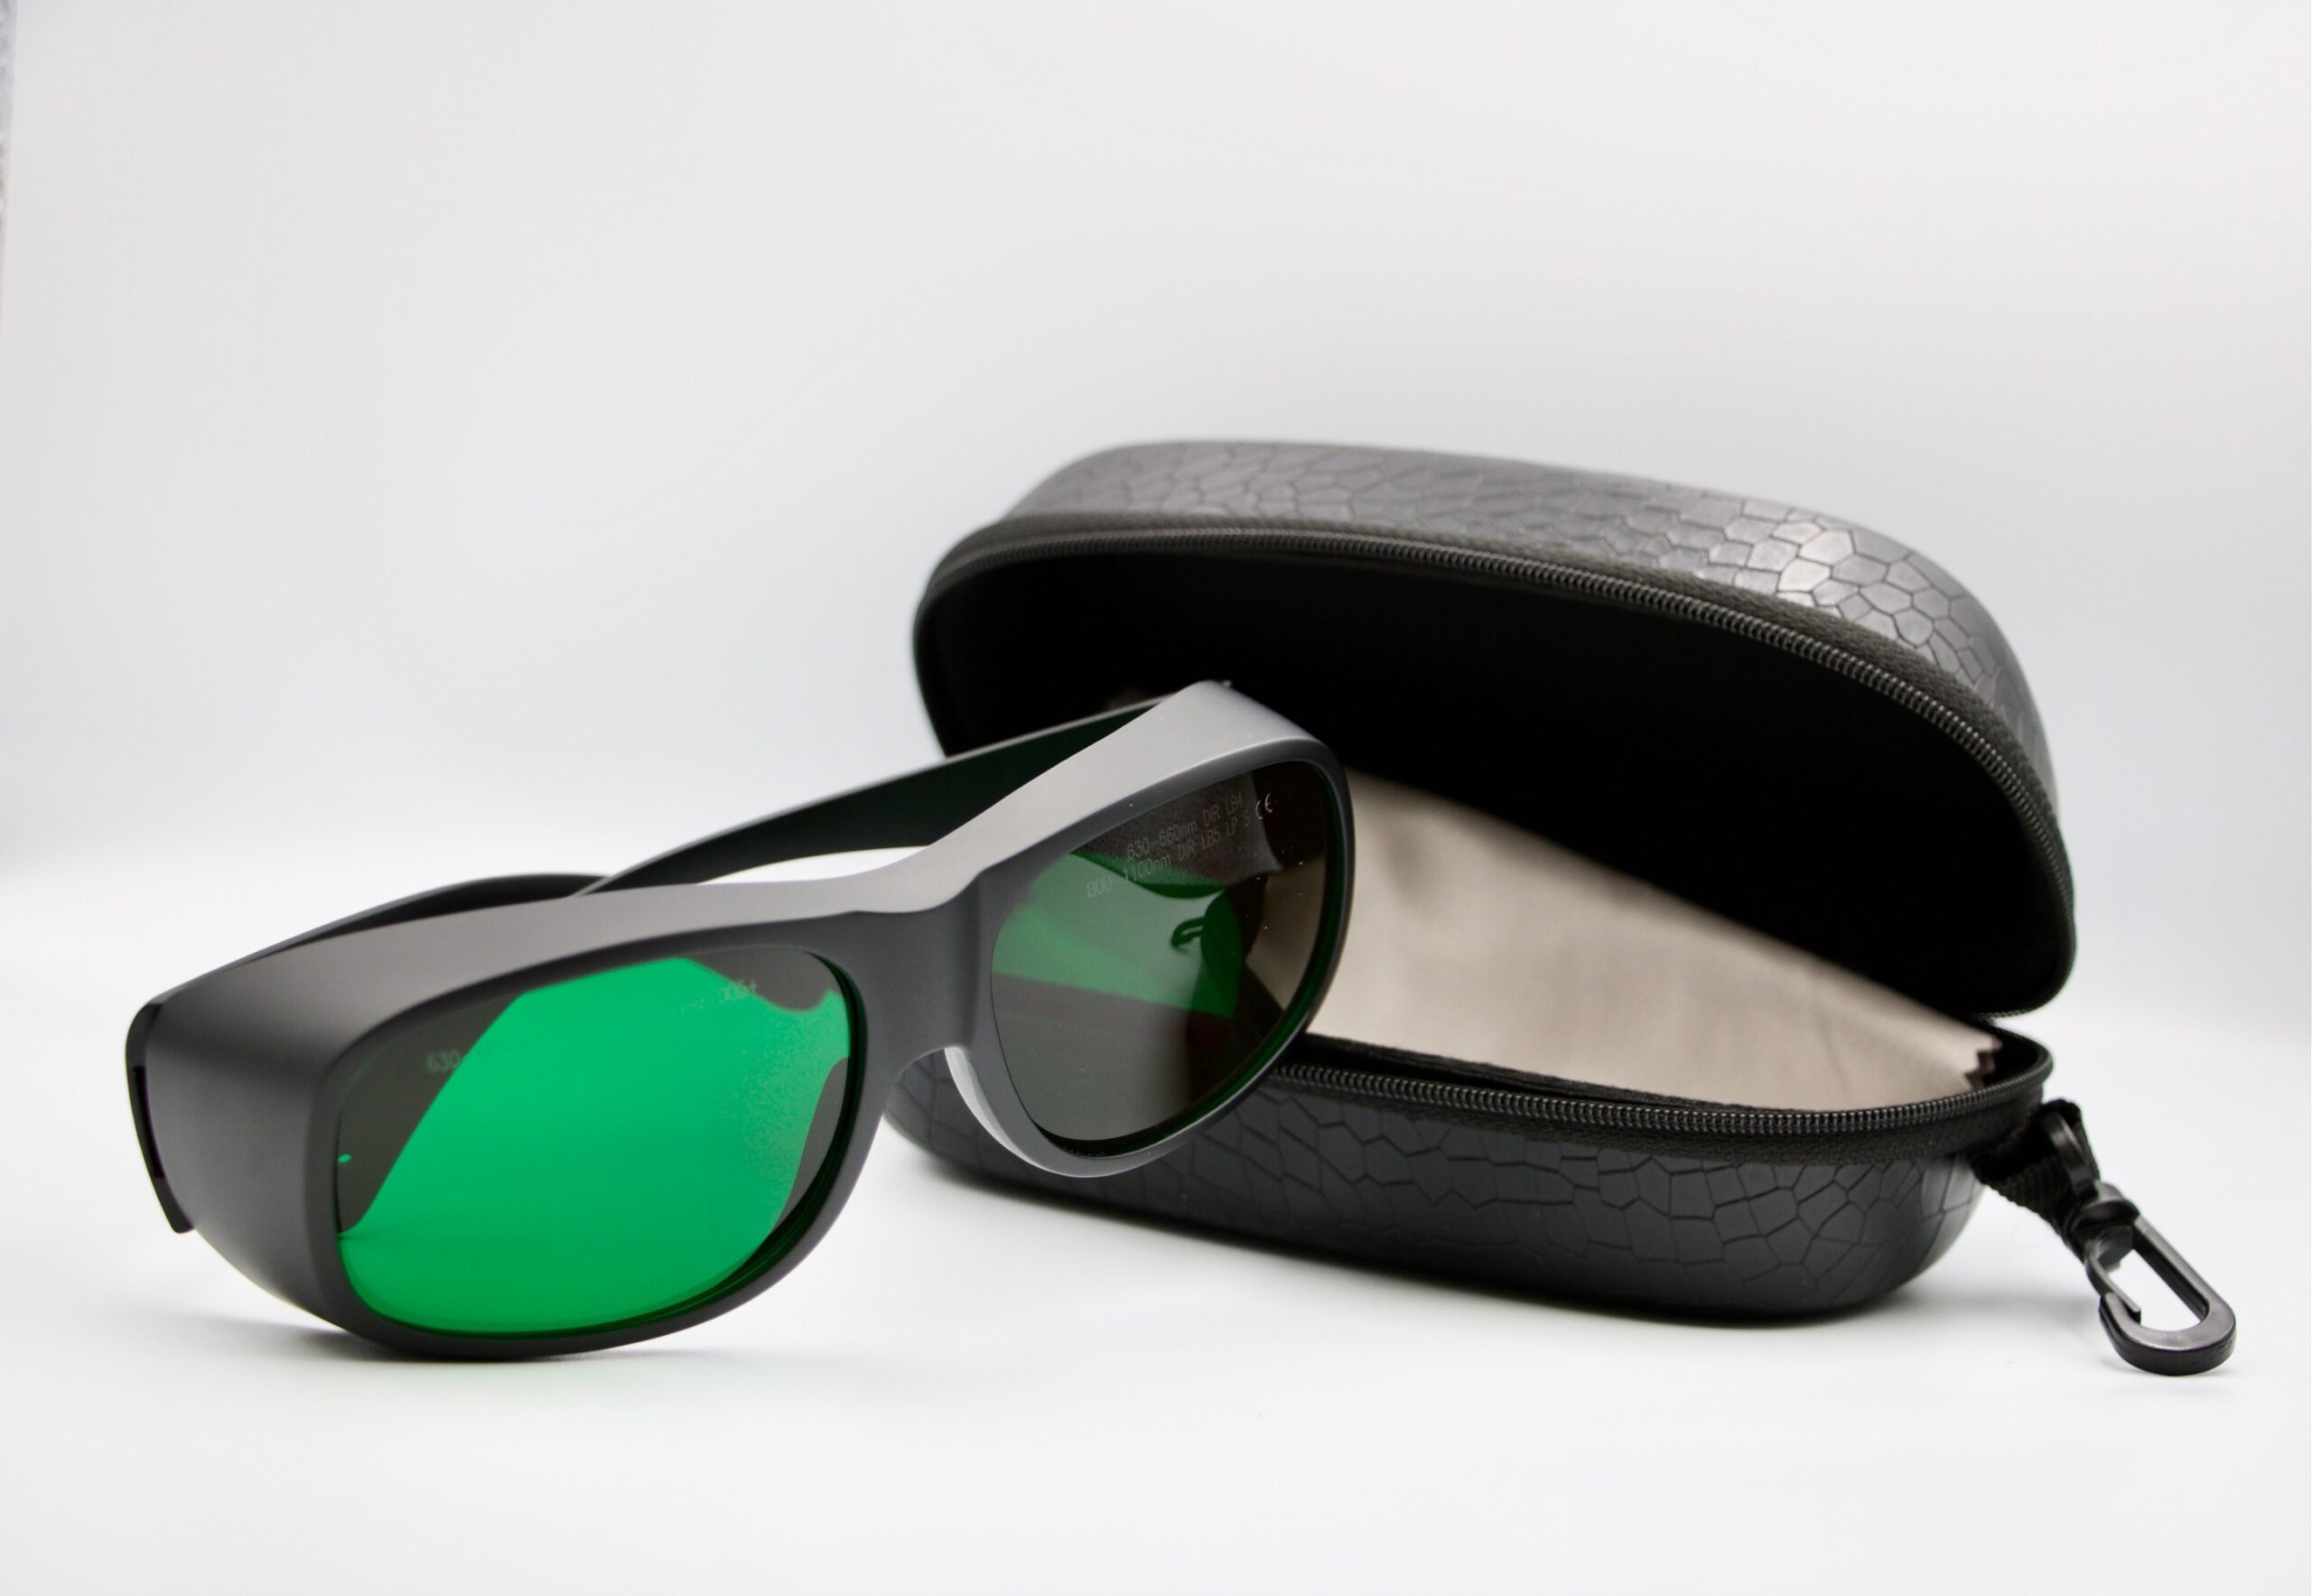 Laser protective goggles